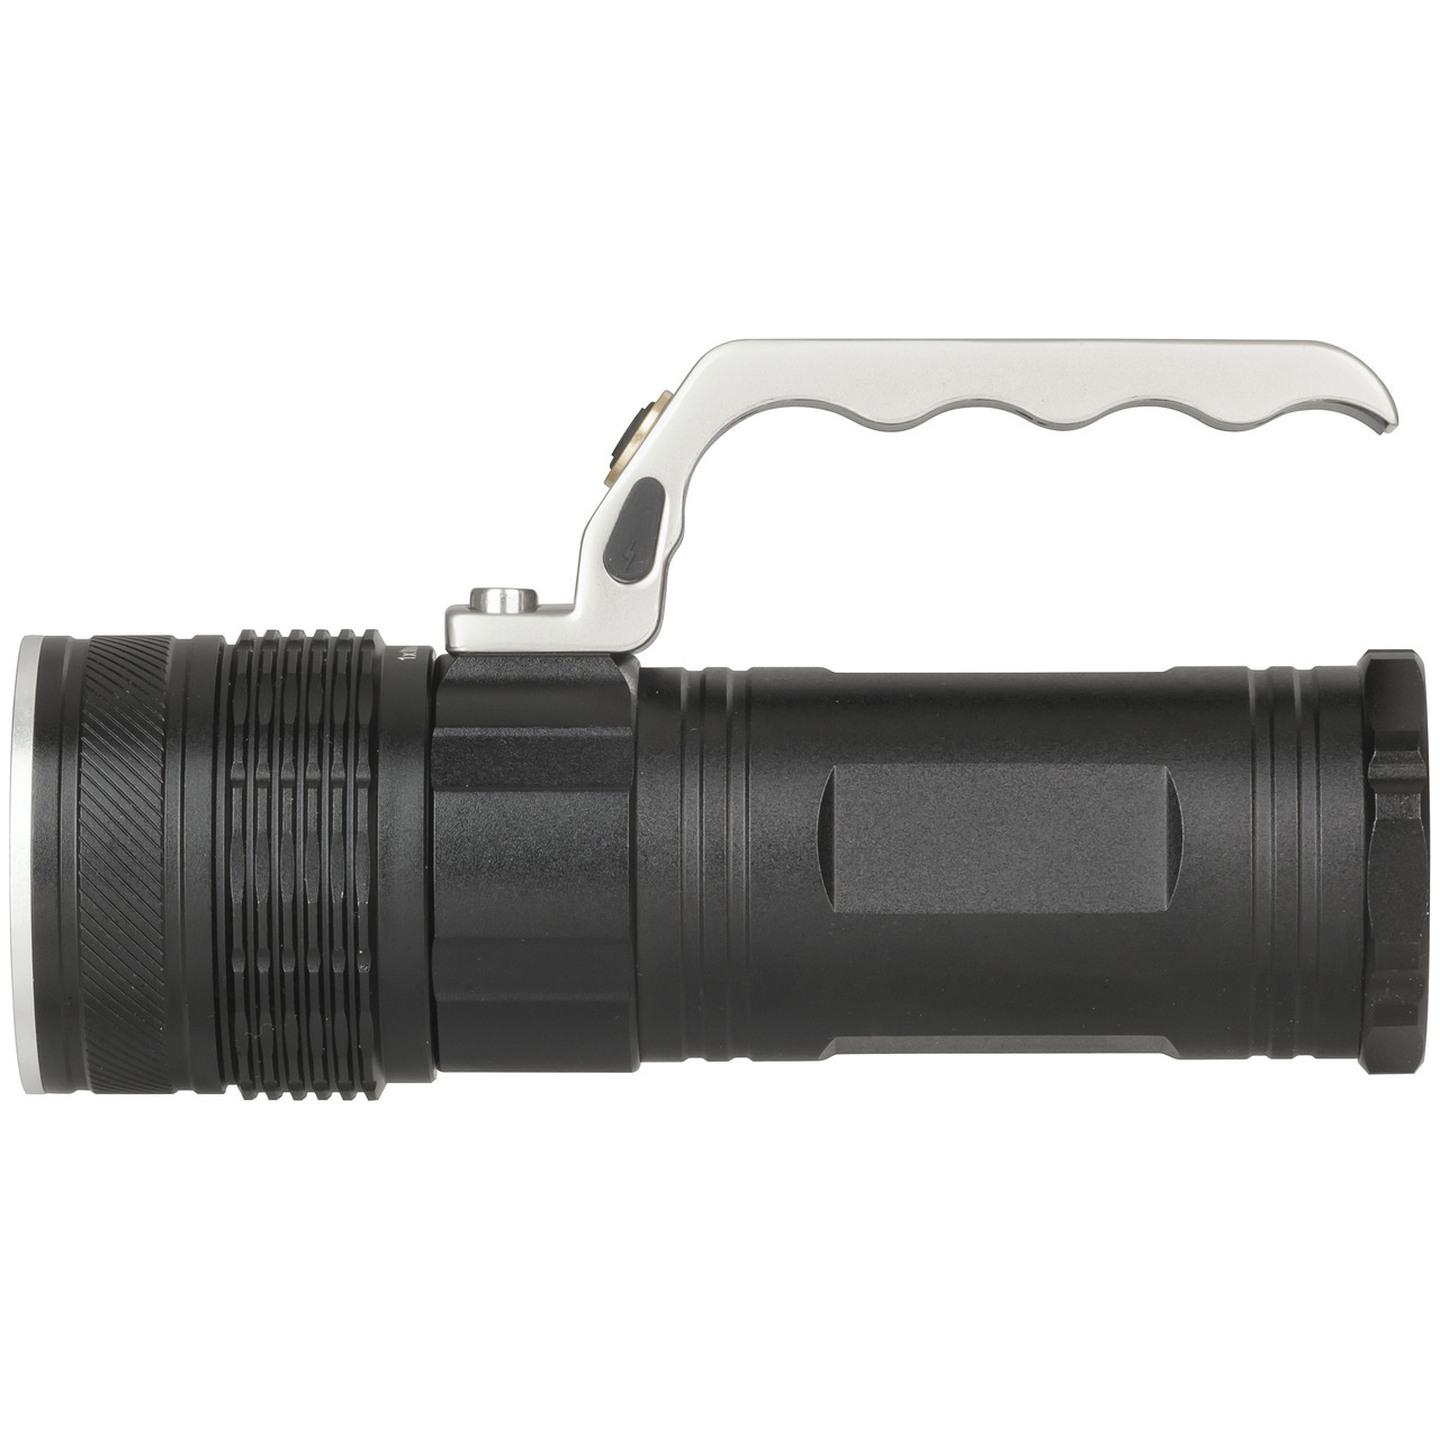 600 Lumen Rechargeable LED Spotlight with Adjustable Beam and Cree XML LED